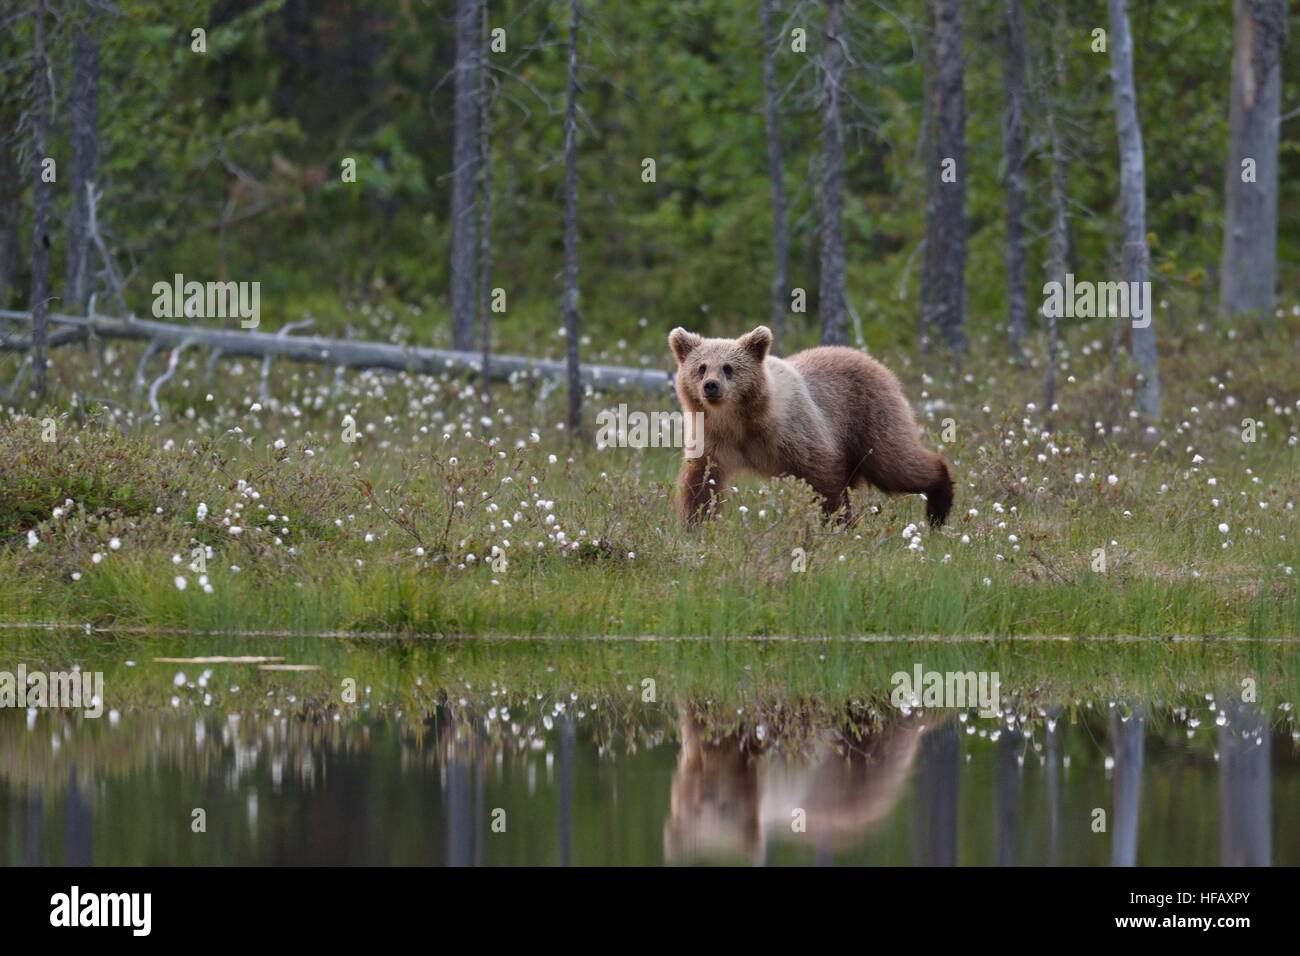 bear cub walking next to pond with reflection Stock Photo